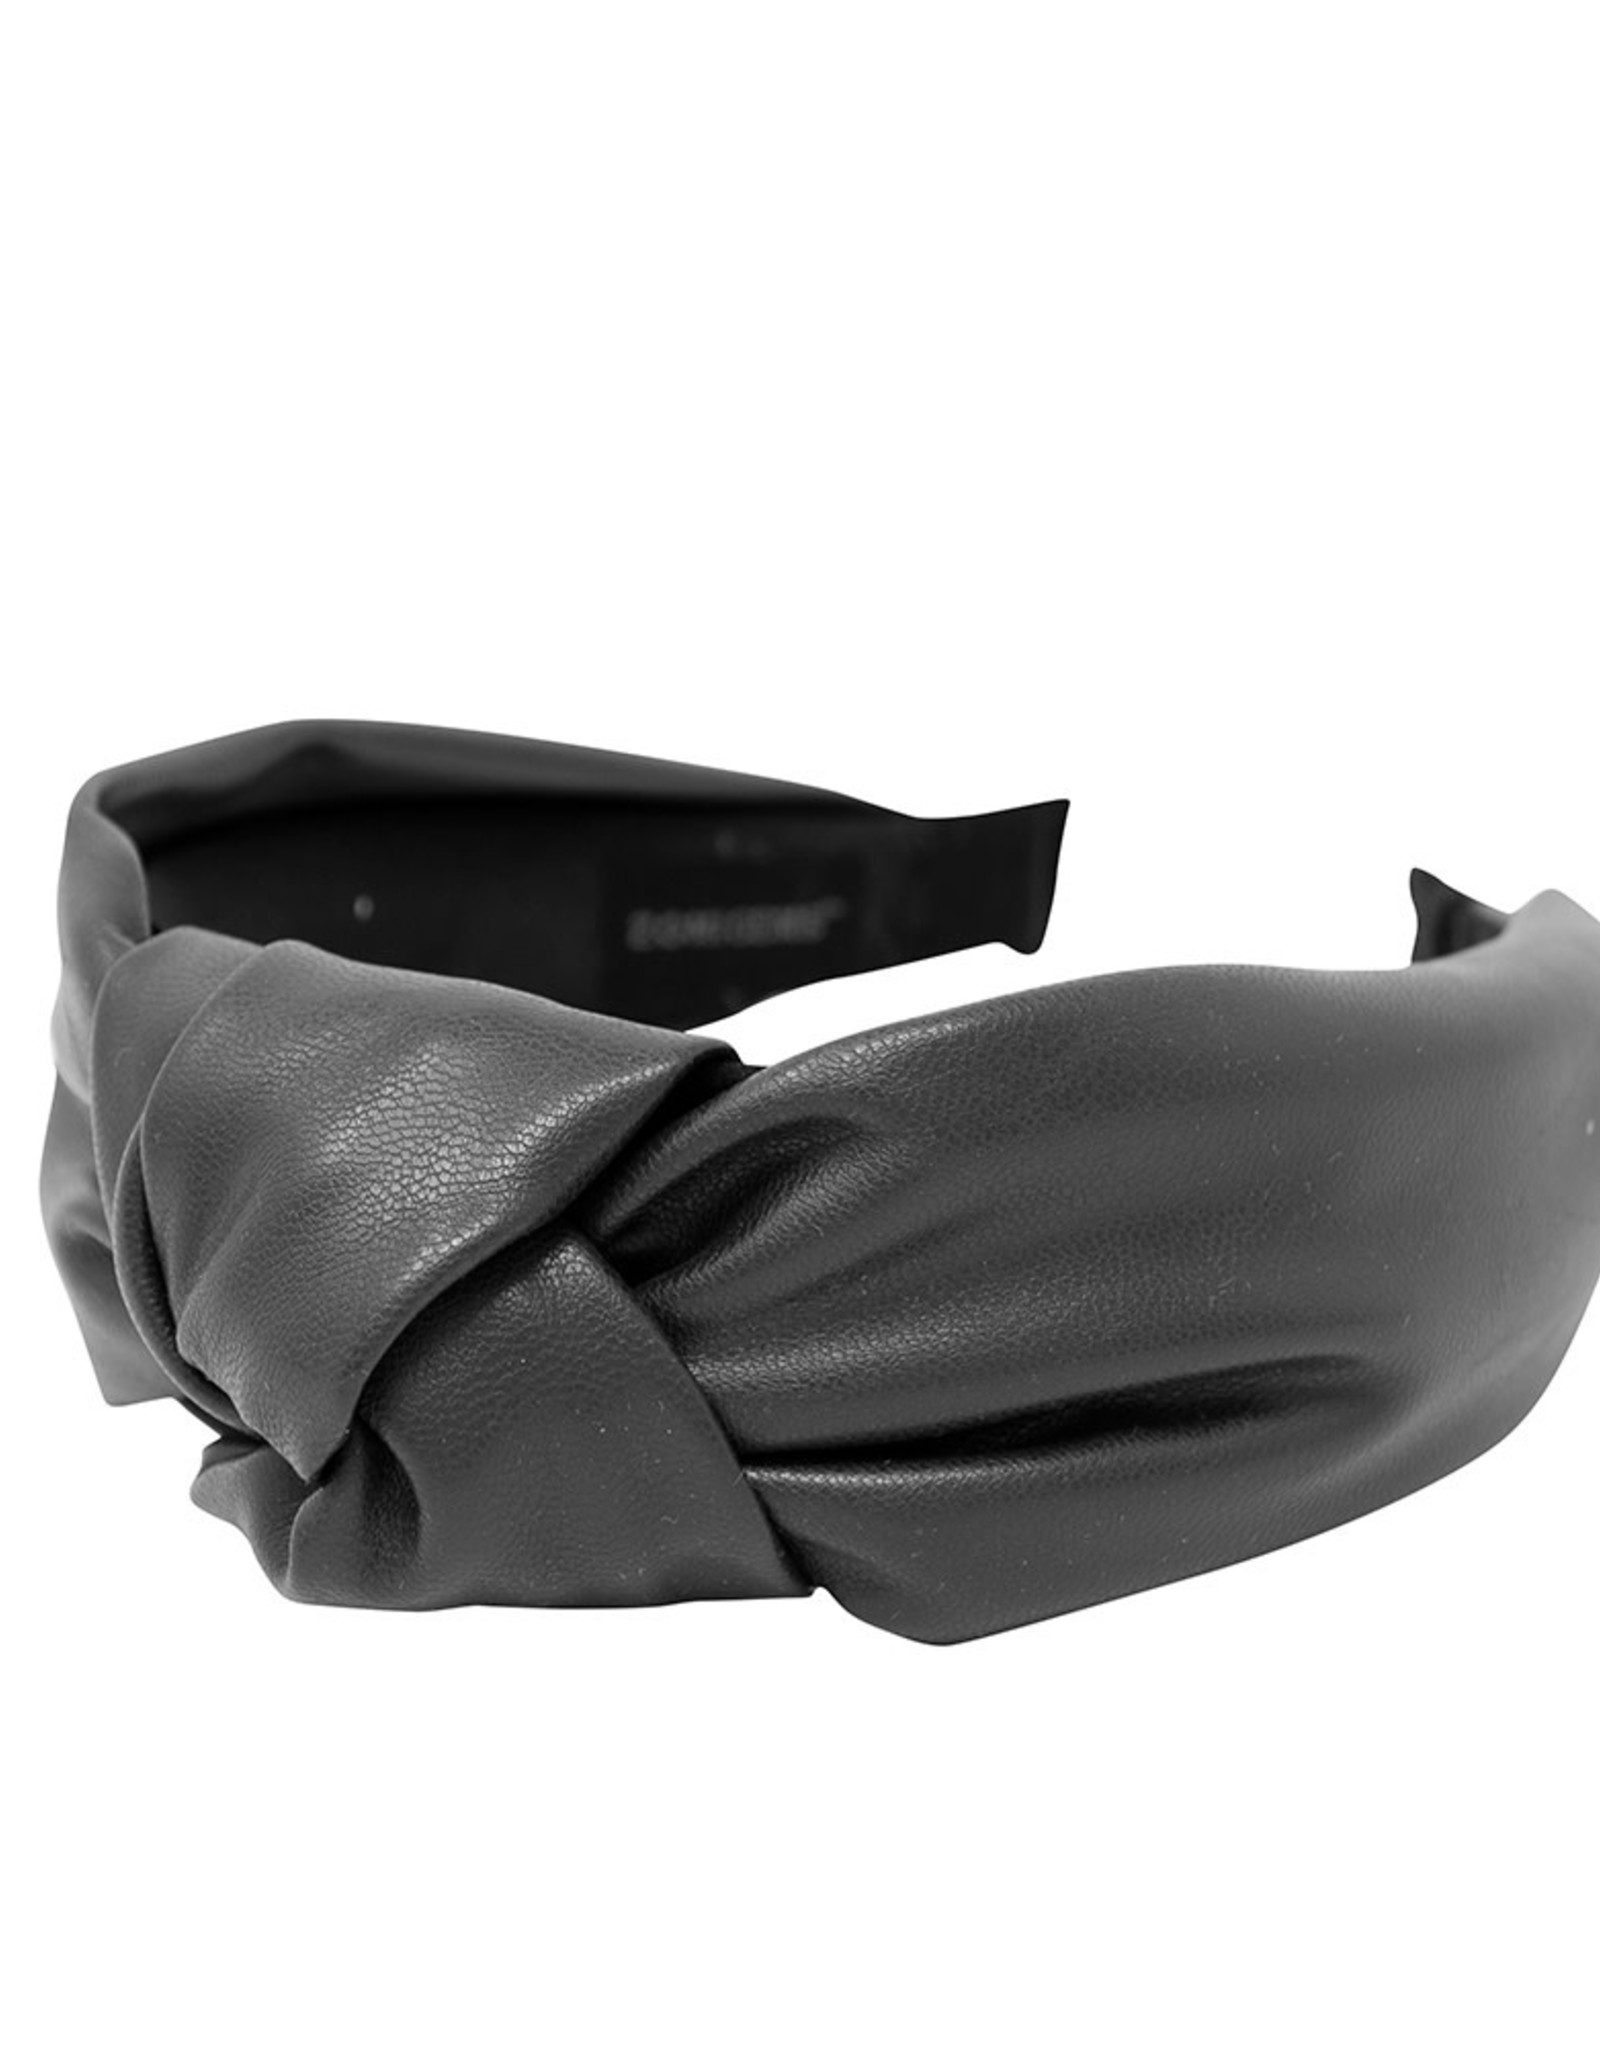 Zomi Gems Leather Knotted Hairband - Black